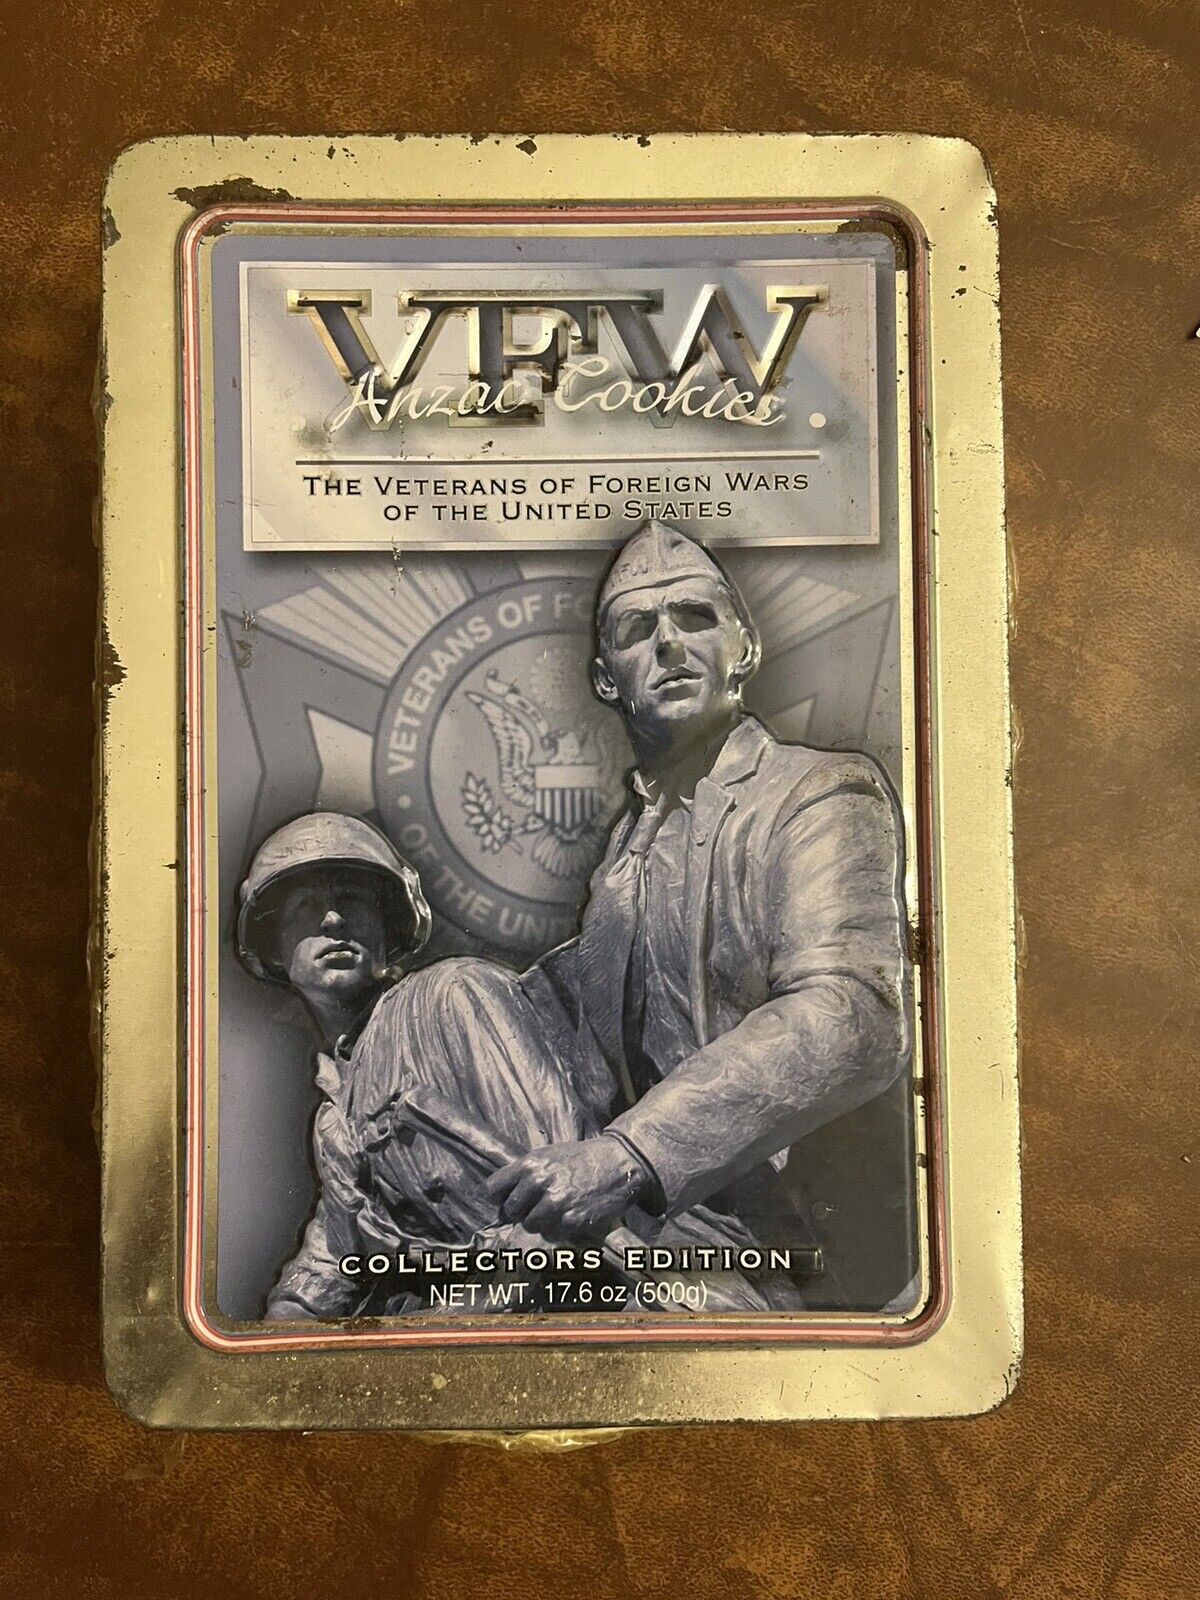 VFW ANZAC OATMEAL COOKIE TIN, THE VETERANS OF FOREIGN WARS COLLECTORS EDITION II